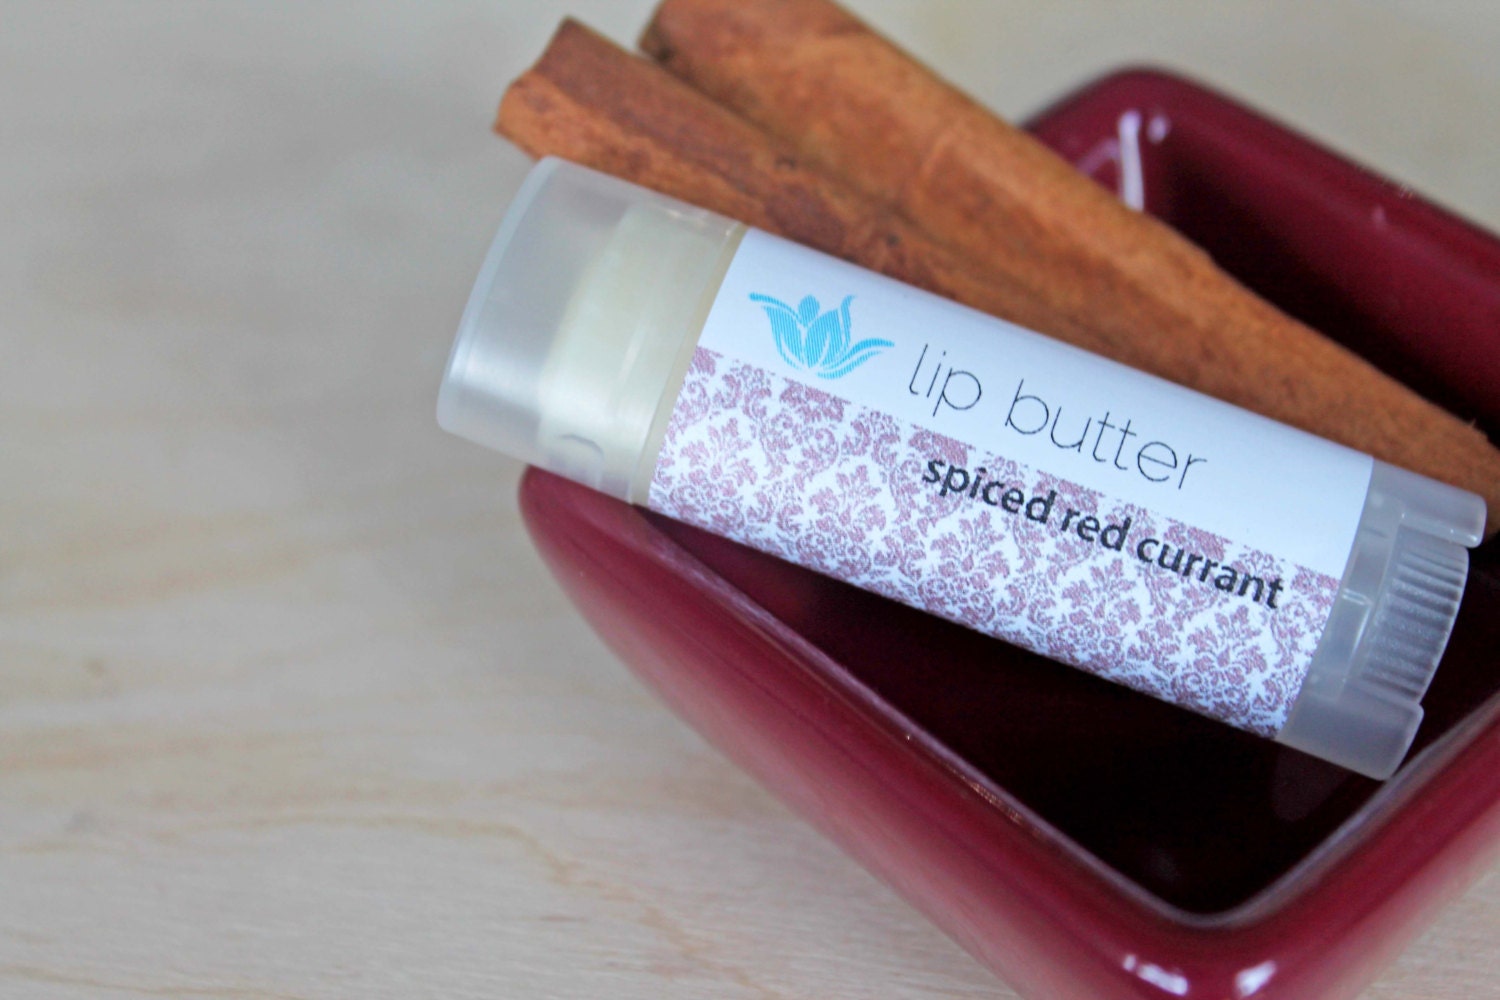 Spiced Red Currant lip butter, Fall 2013 Collection, natural vegan gluten-free lip balm